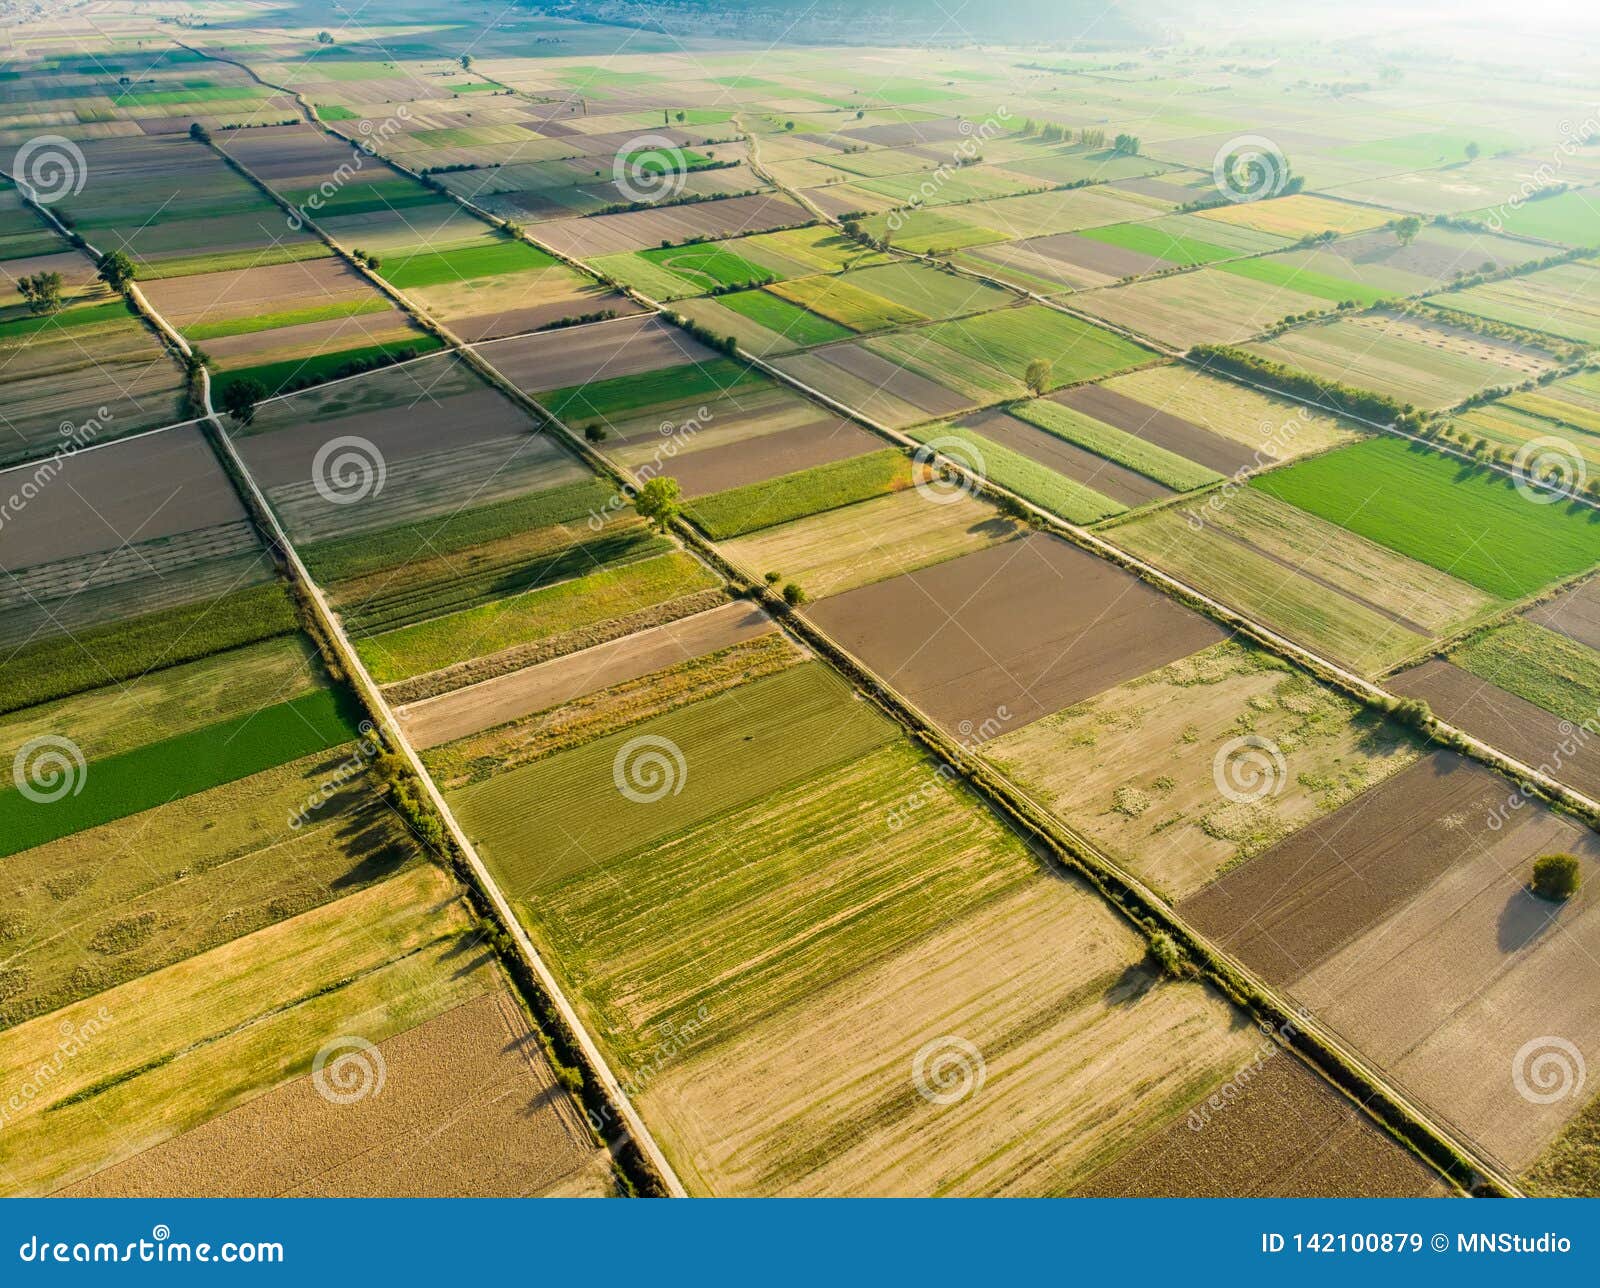 Abstract Geometric Shapes of Agricultural Parcels of Different Crops in ...